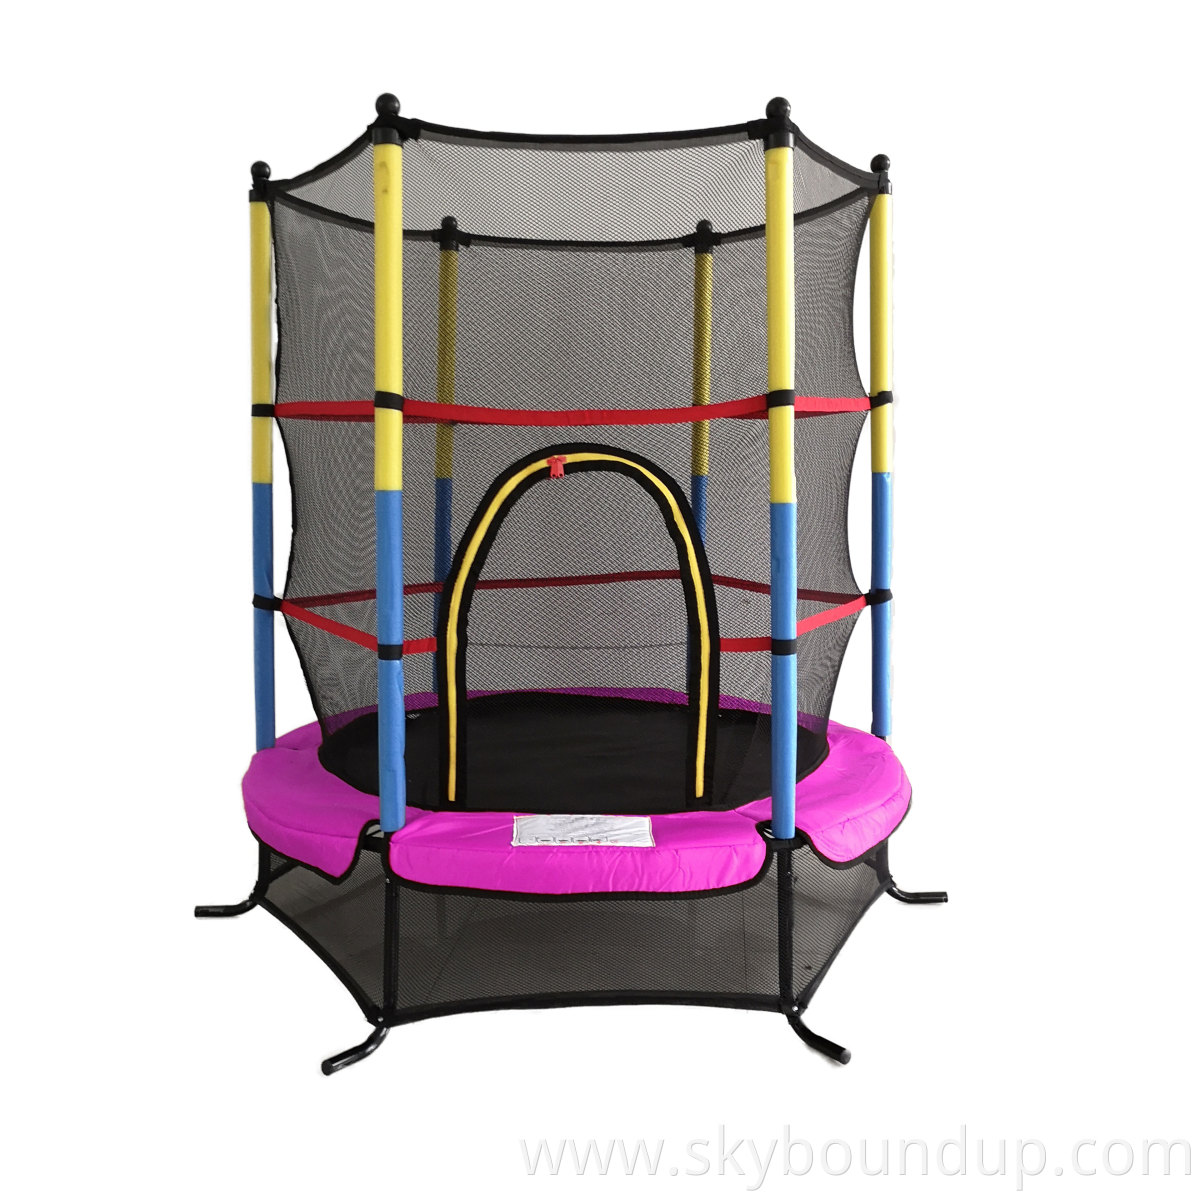 Trampoline for Kids with Net - 5 FT Indoor Outdoor Toddler Trampoline with Safety Enclosure for Fun